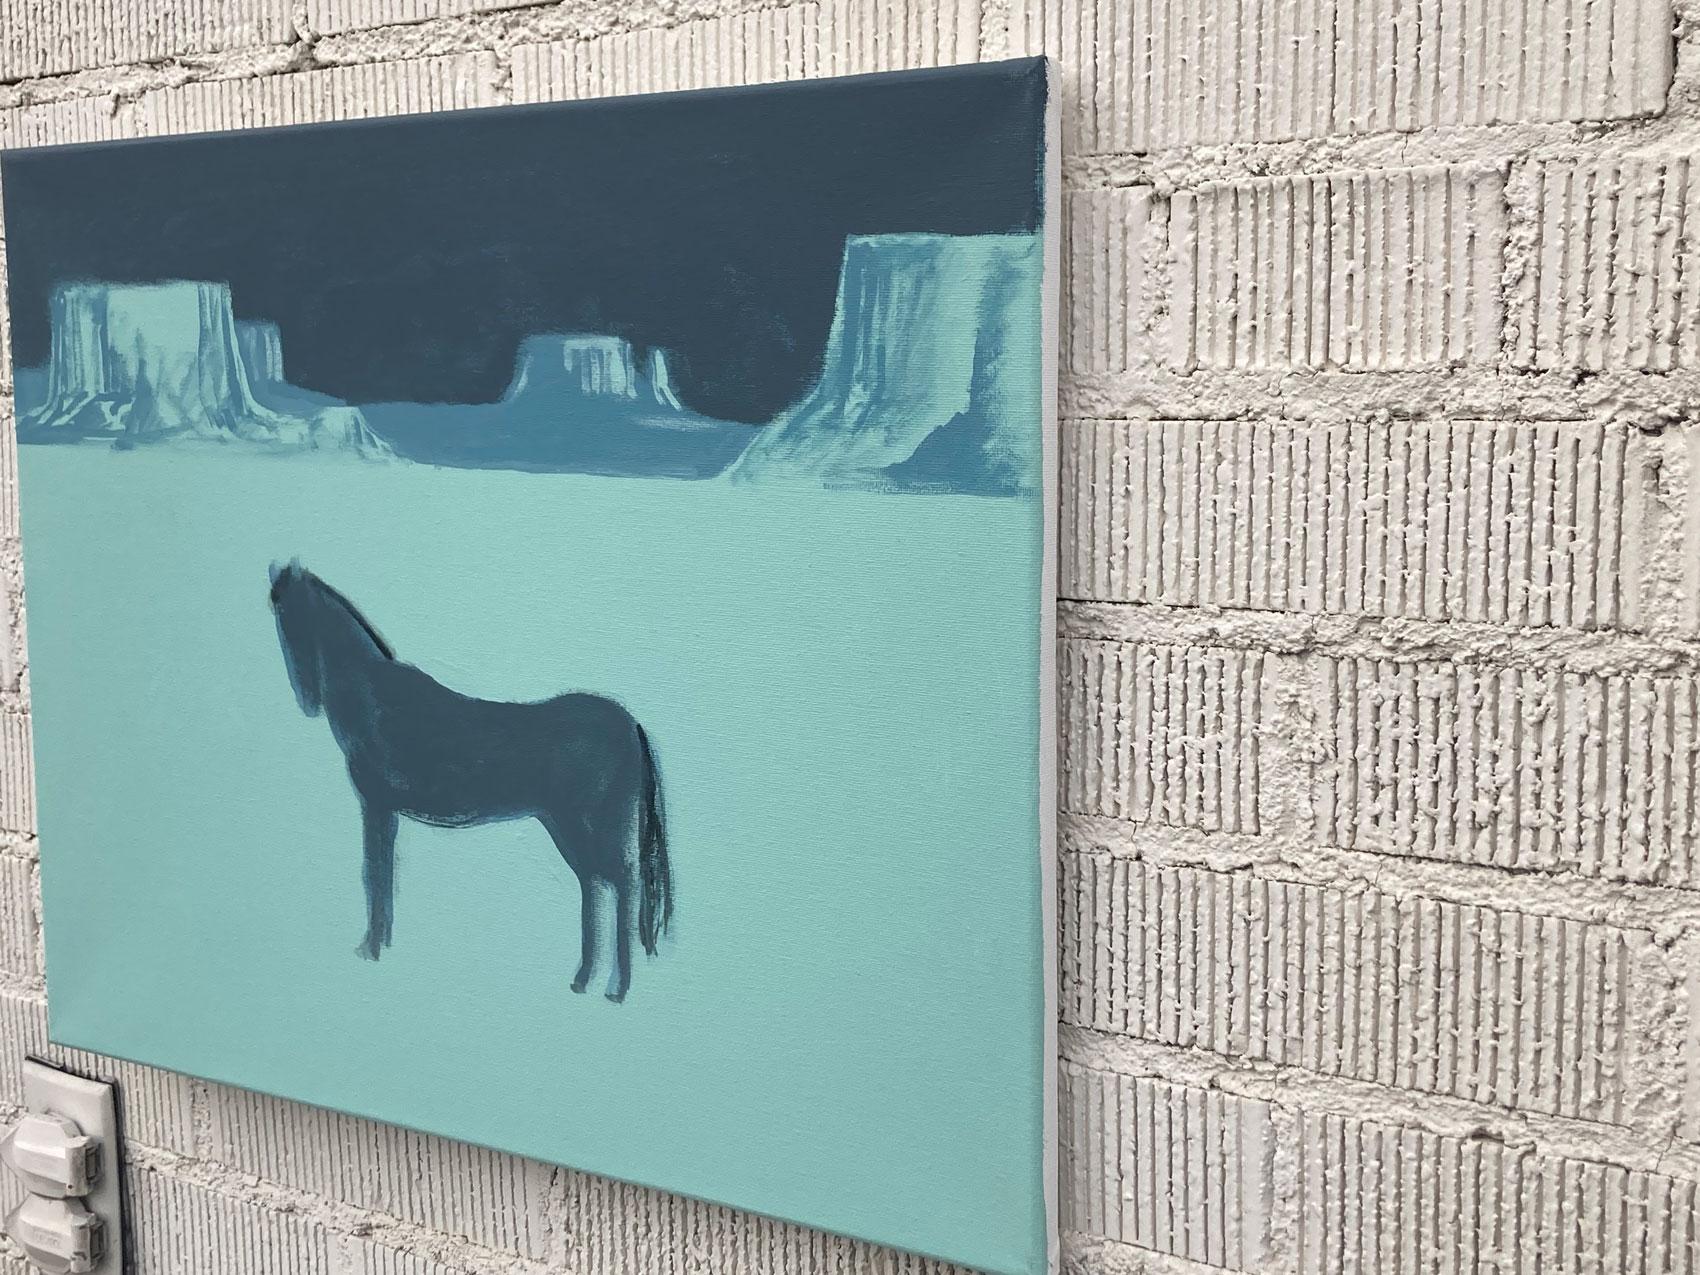 <p>Artist Comments<br>Artist Nick Bontorno paints a lone horse standing in a vast canyon. The pale blue tones and minimal representation display a relaxed resonance throughout the barren pastoral landscape. His painterly approach further creates an